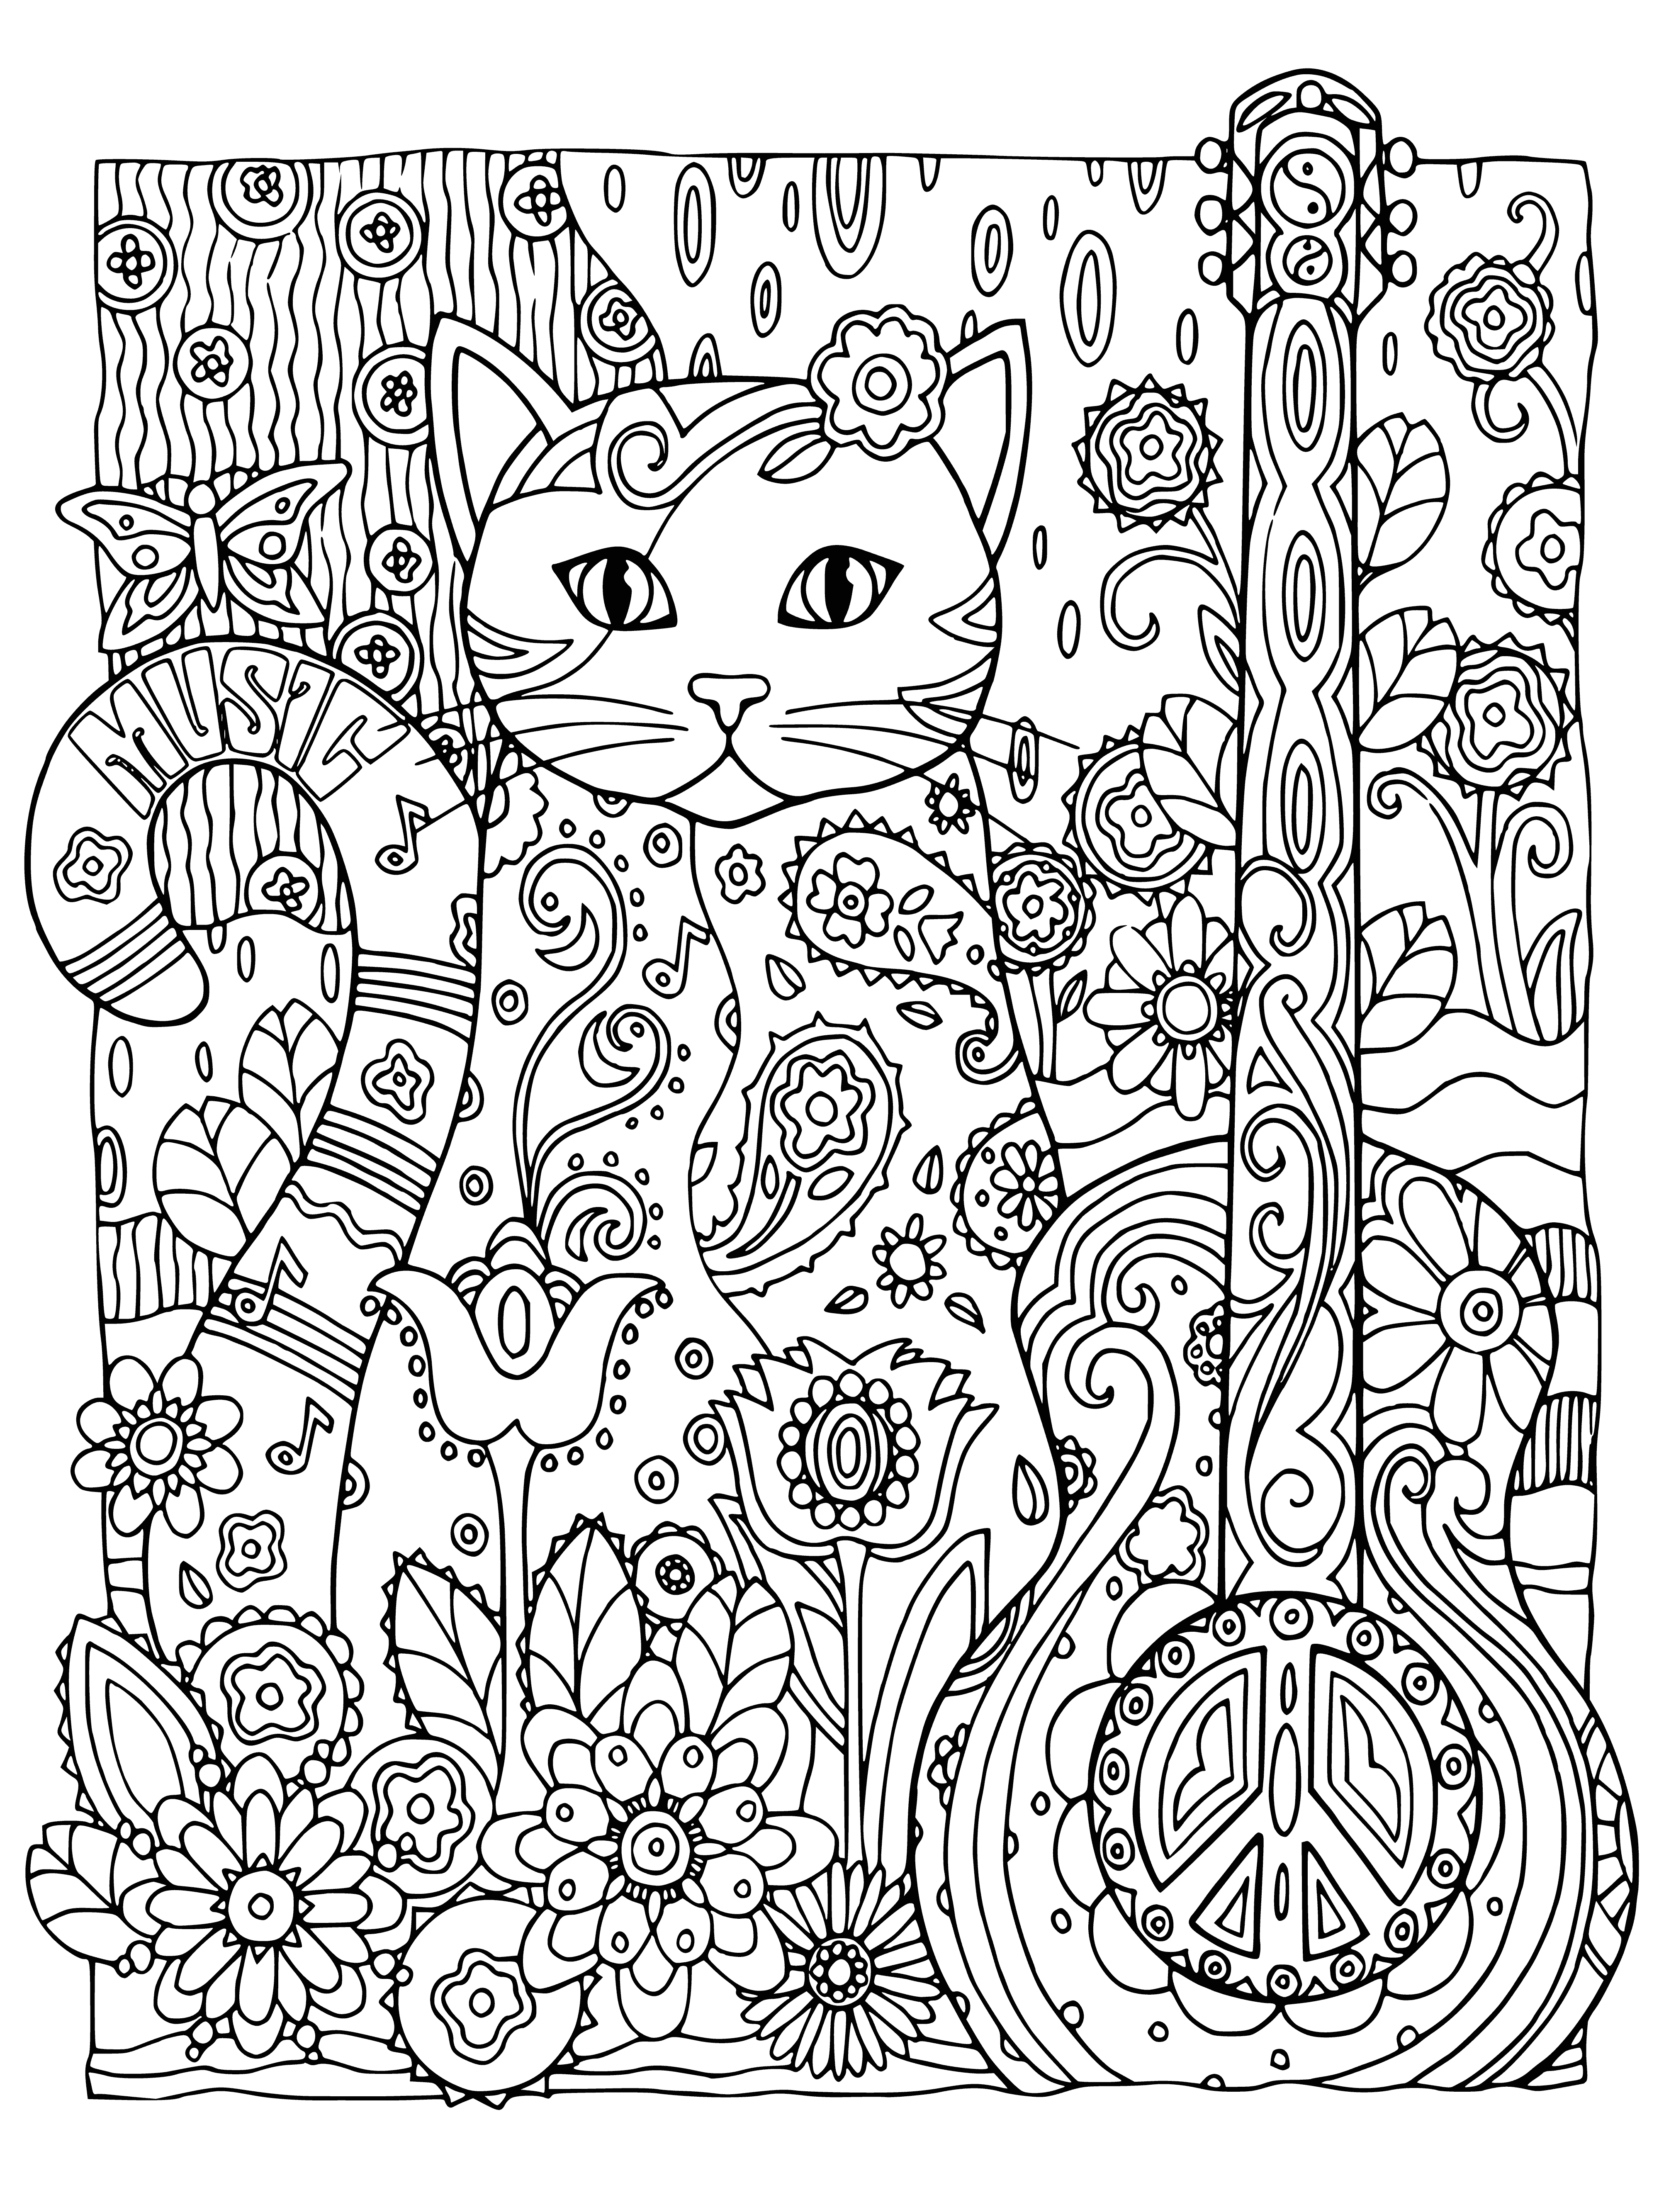 coloring page: Relaxing coloring pages of cats in various positions, some sleeping plus soothing background music.